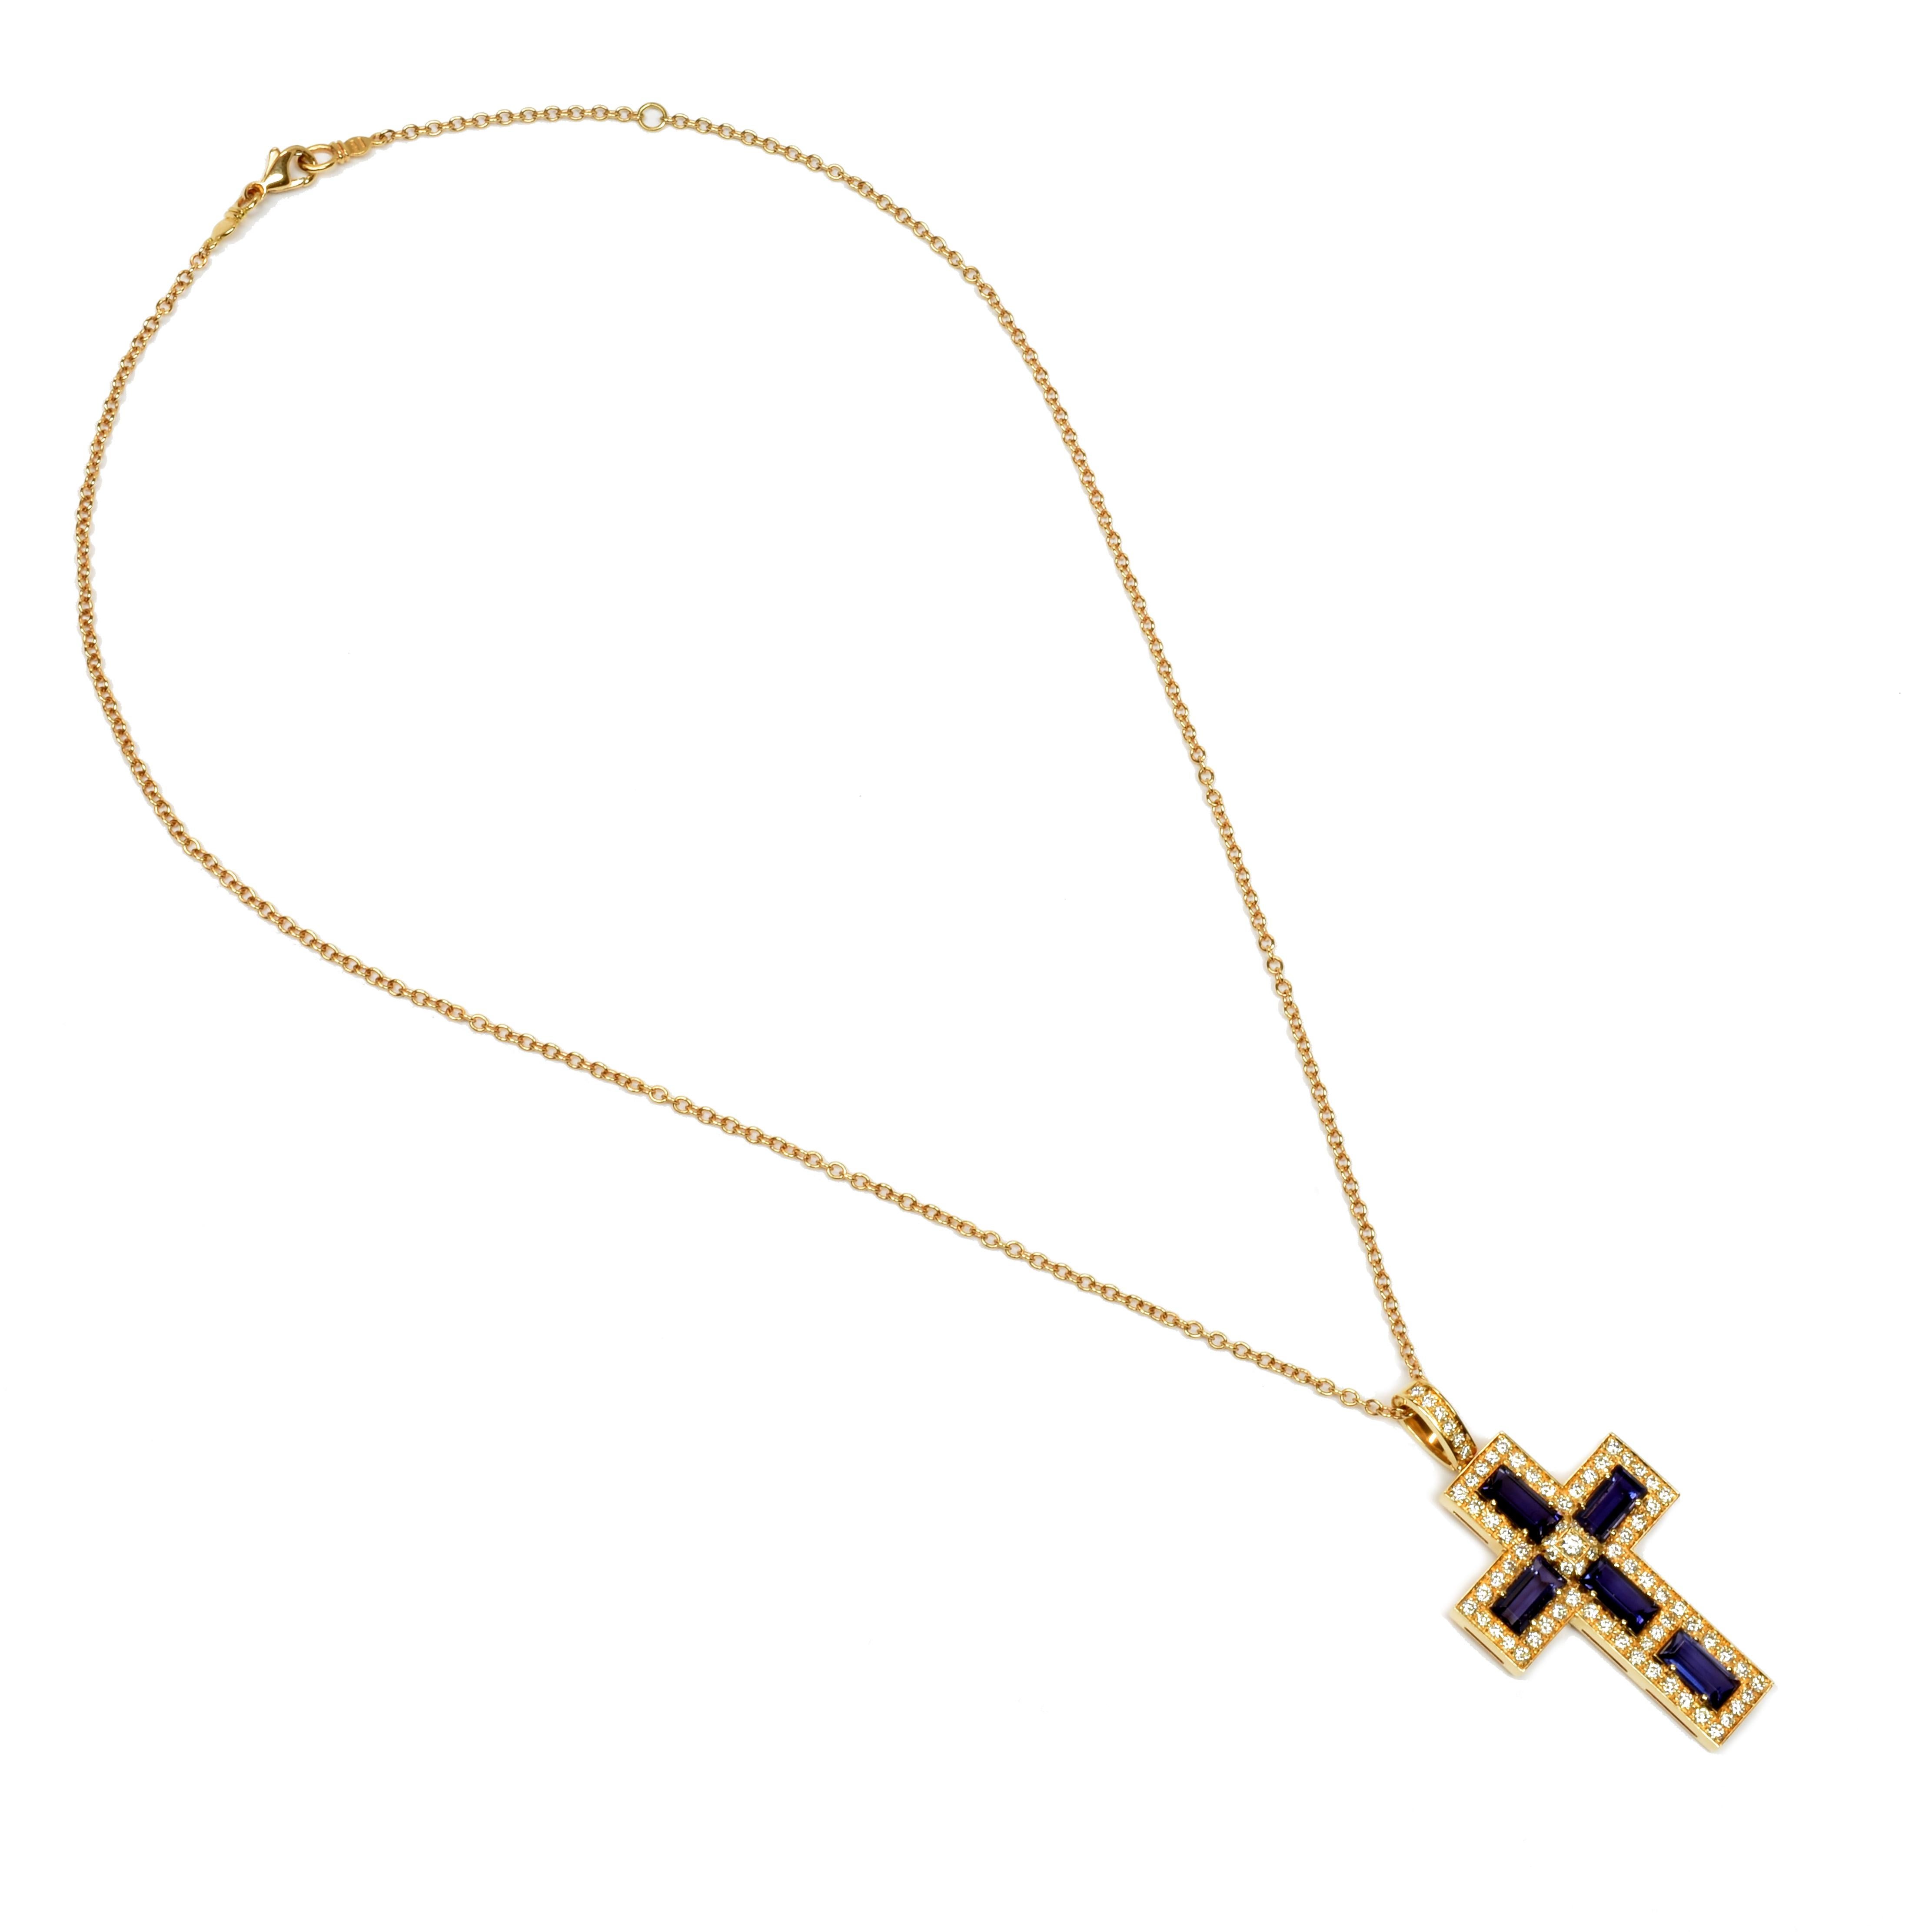 Gilberto Cassola 18Kt Rose Gold Cross Pendant with Iolite Baguettes and White Diamonds.
Handmade in our Atelier in Valenza Italy.
This Piece comes with a 46 cm 18Kt Rose Gold Chain.
A Modern and Stylish Cross for an everyday use.
G Color Vs Clarity